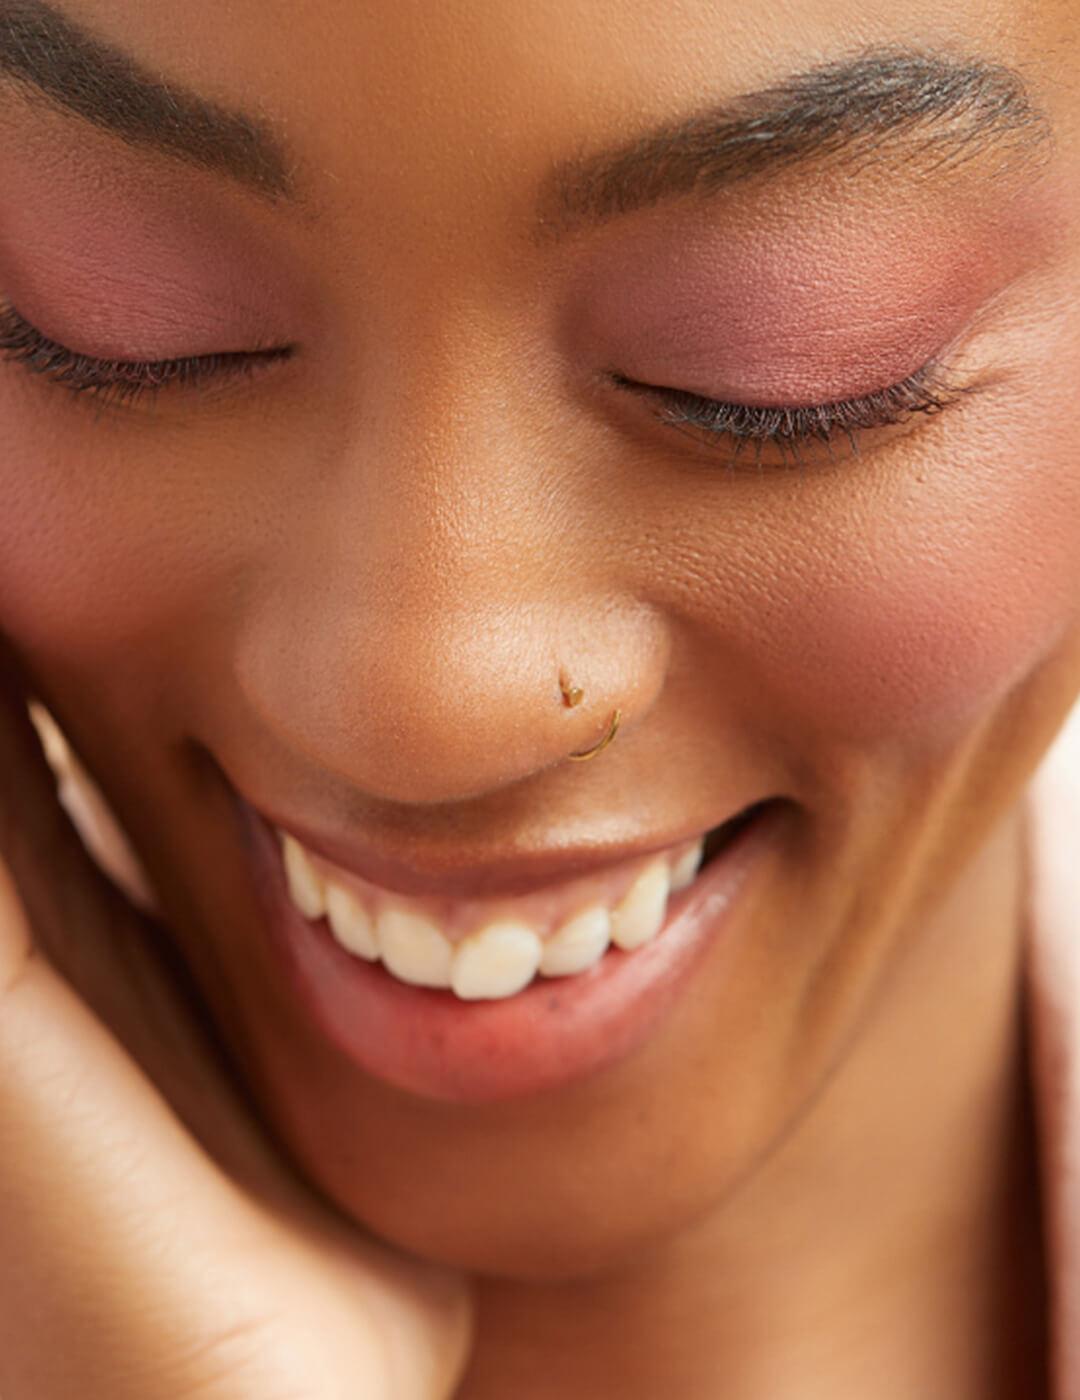 Close-up of a smiling model rocking a rose eyeshadow and blush makeup look